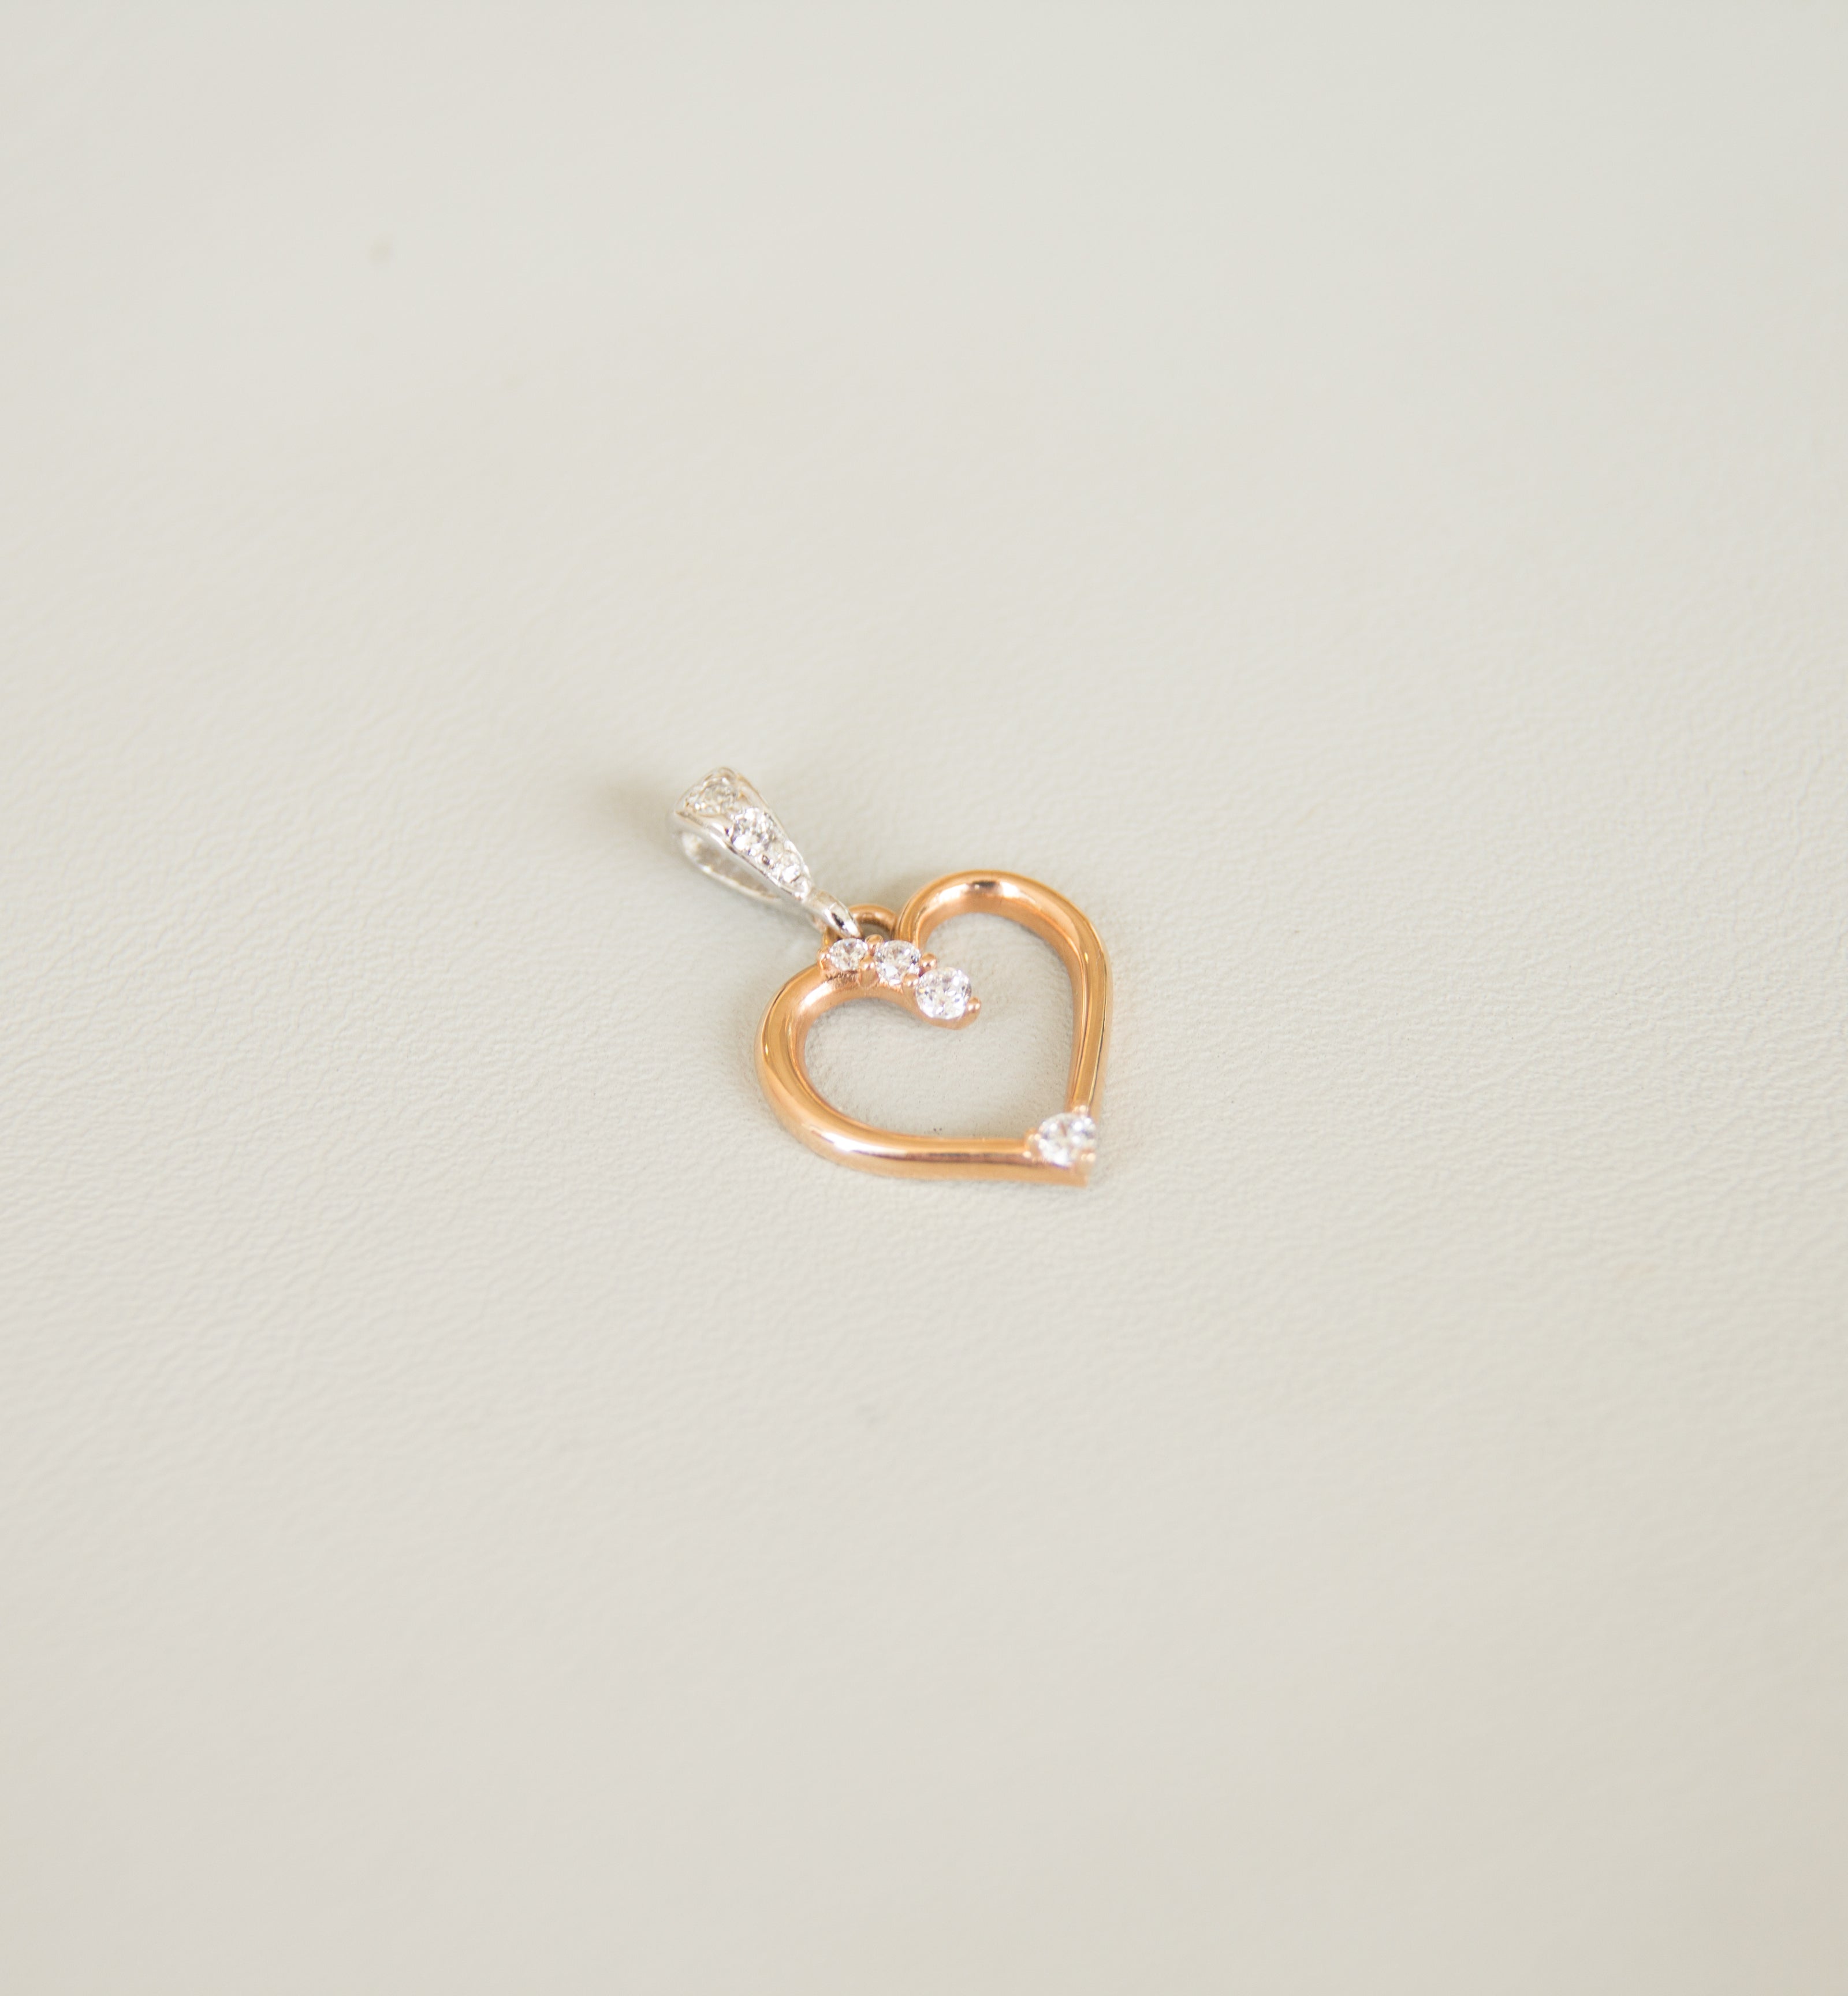 18ct Rose Gold Heart Pendant with Cubic Zircon Stones